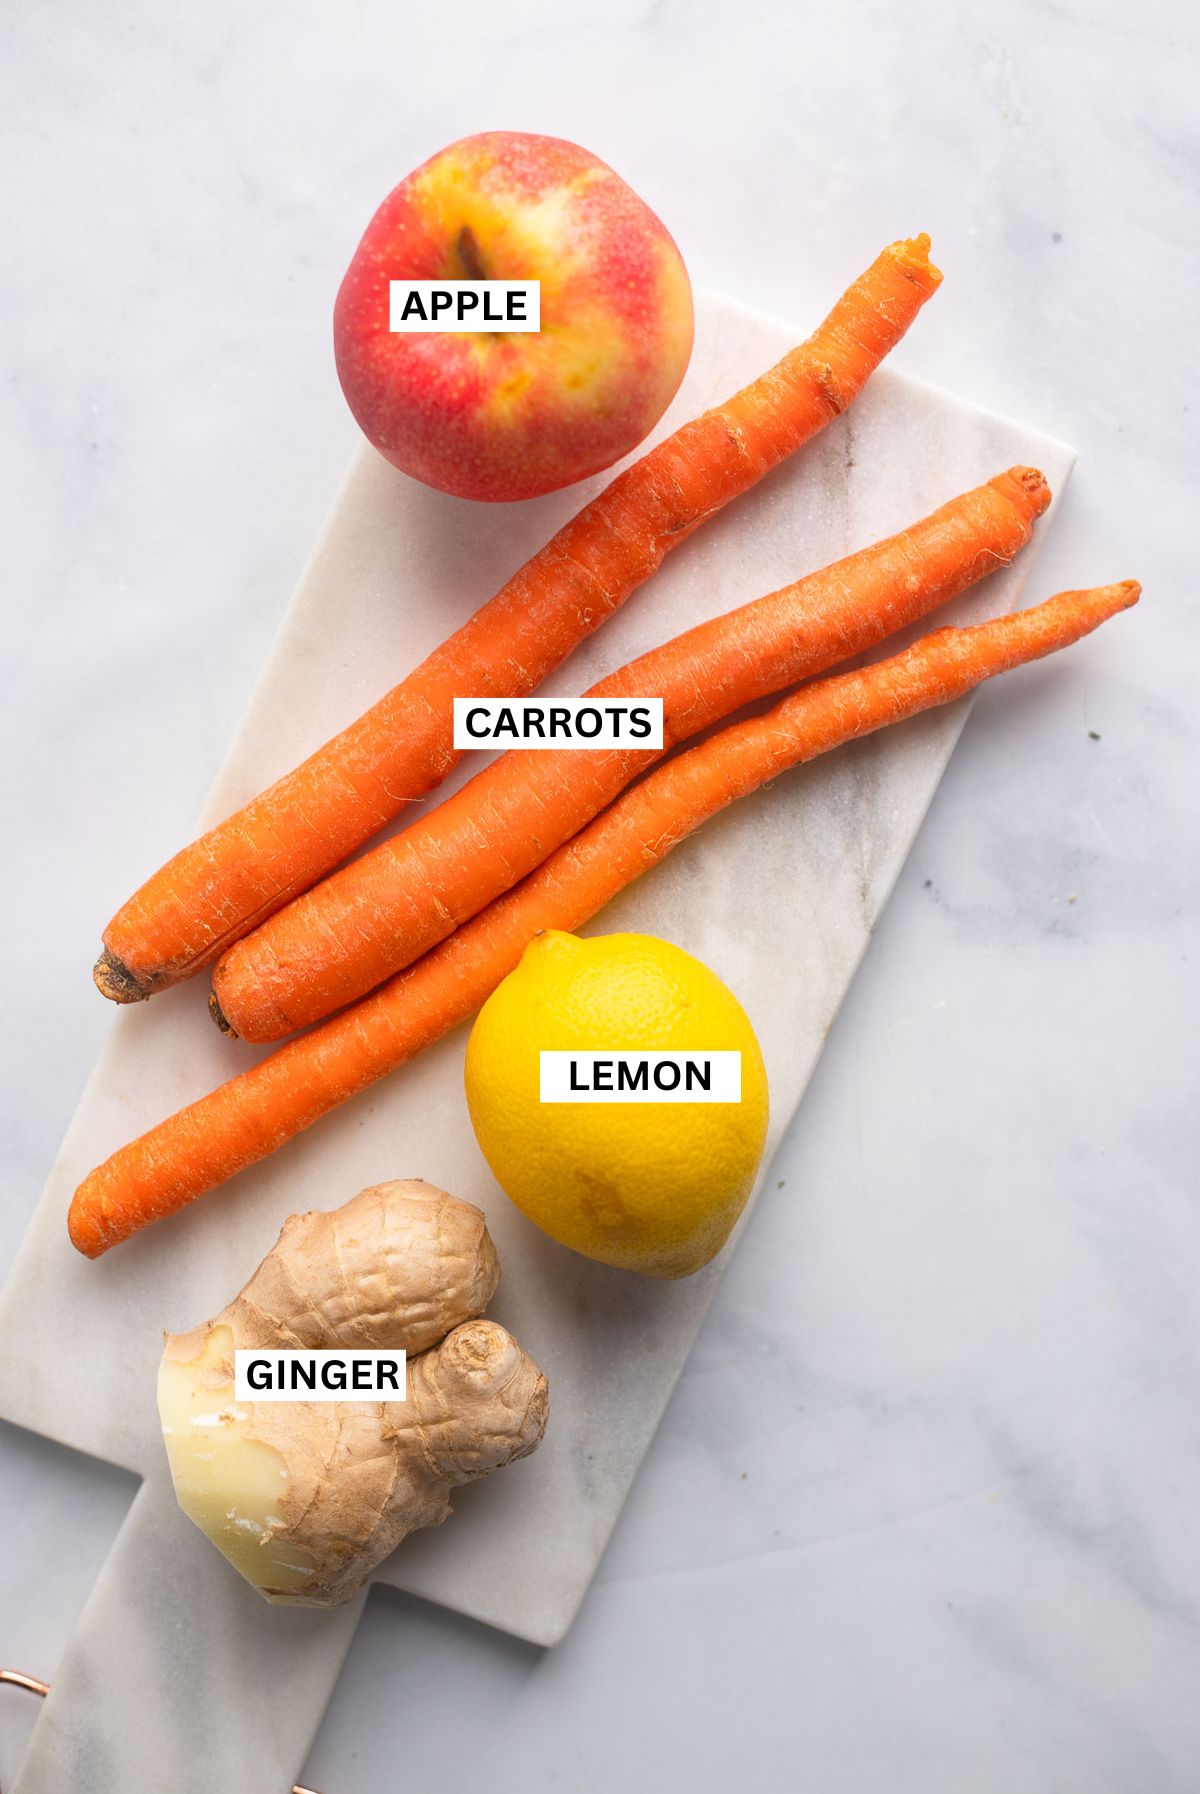 carrot and ginger juice ingredients distributed on white background with labels.